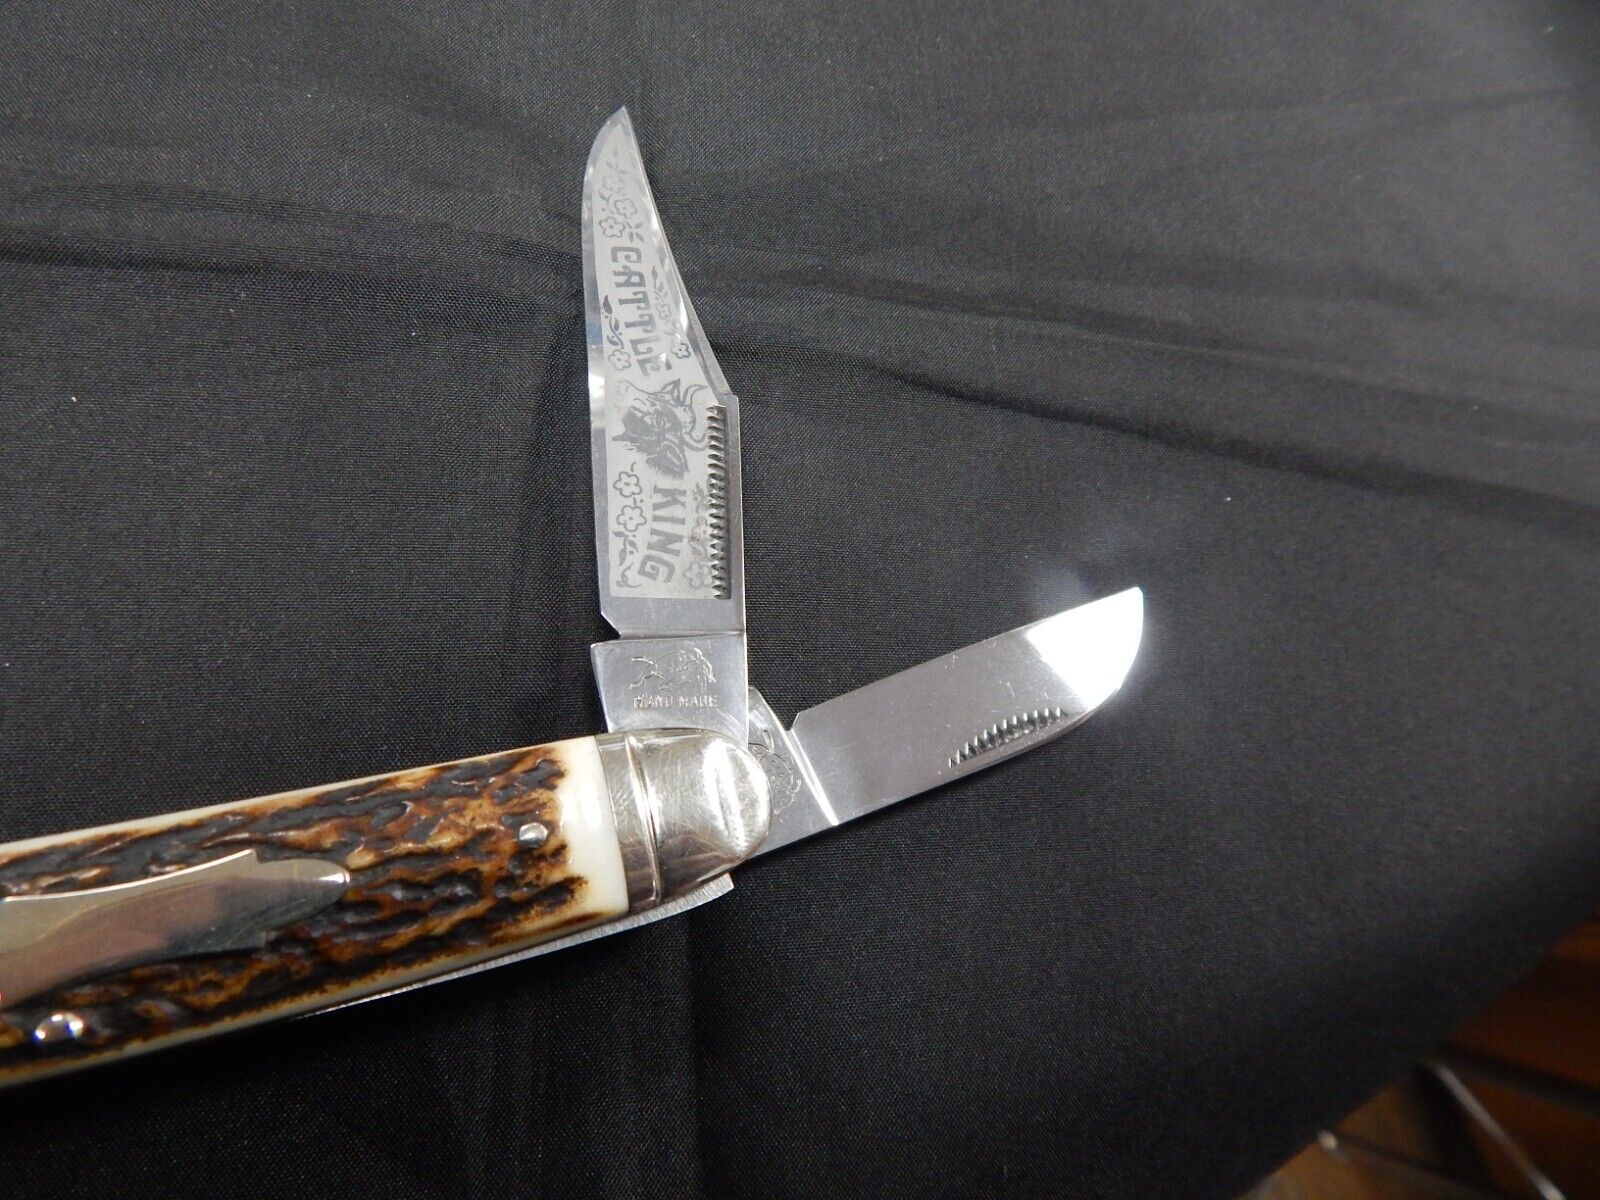 BULLDOG BRAND CATTLE KING STAG KNIFE 3 BLADE VINTAGE GERMAN Stainless